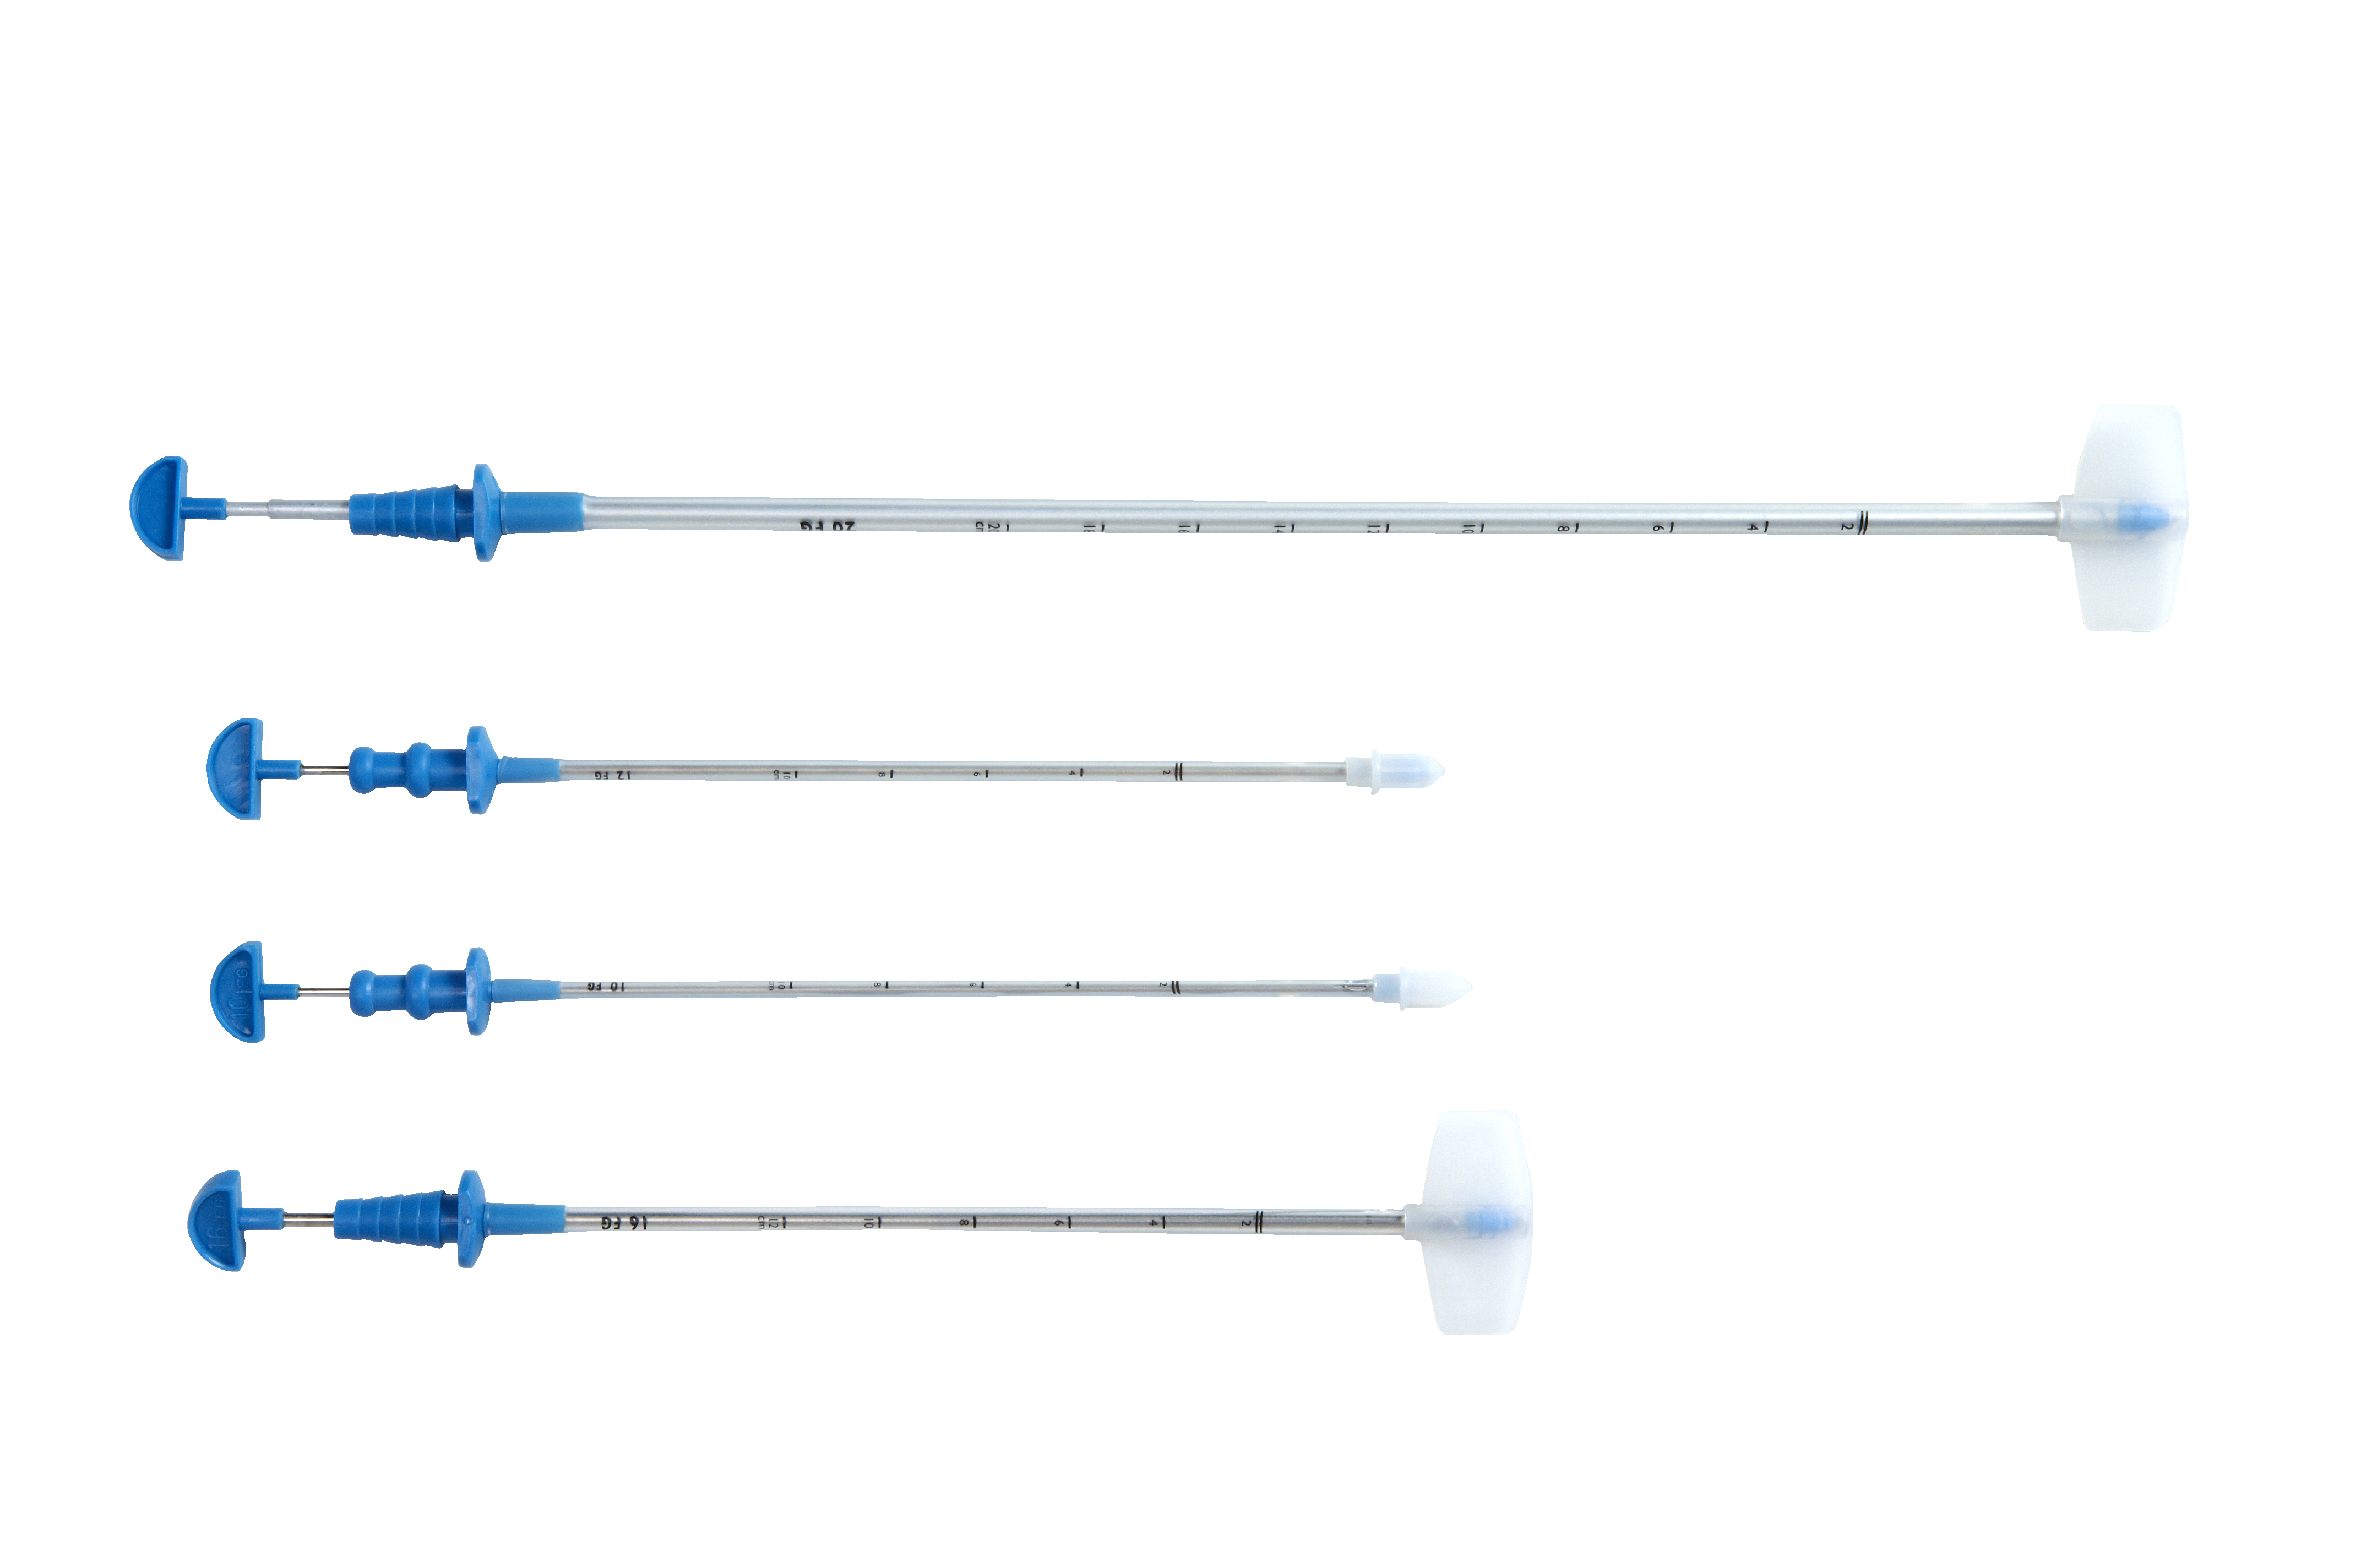 KRUUSE thoracic catheter with trocar, 12 FG, sterile